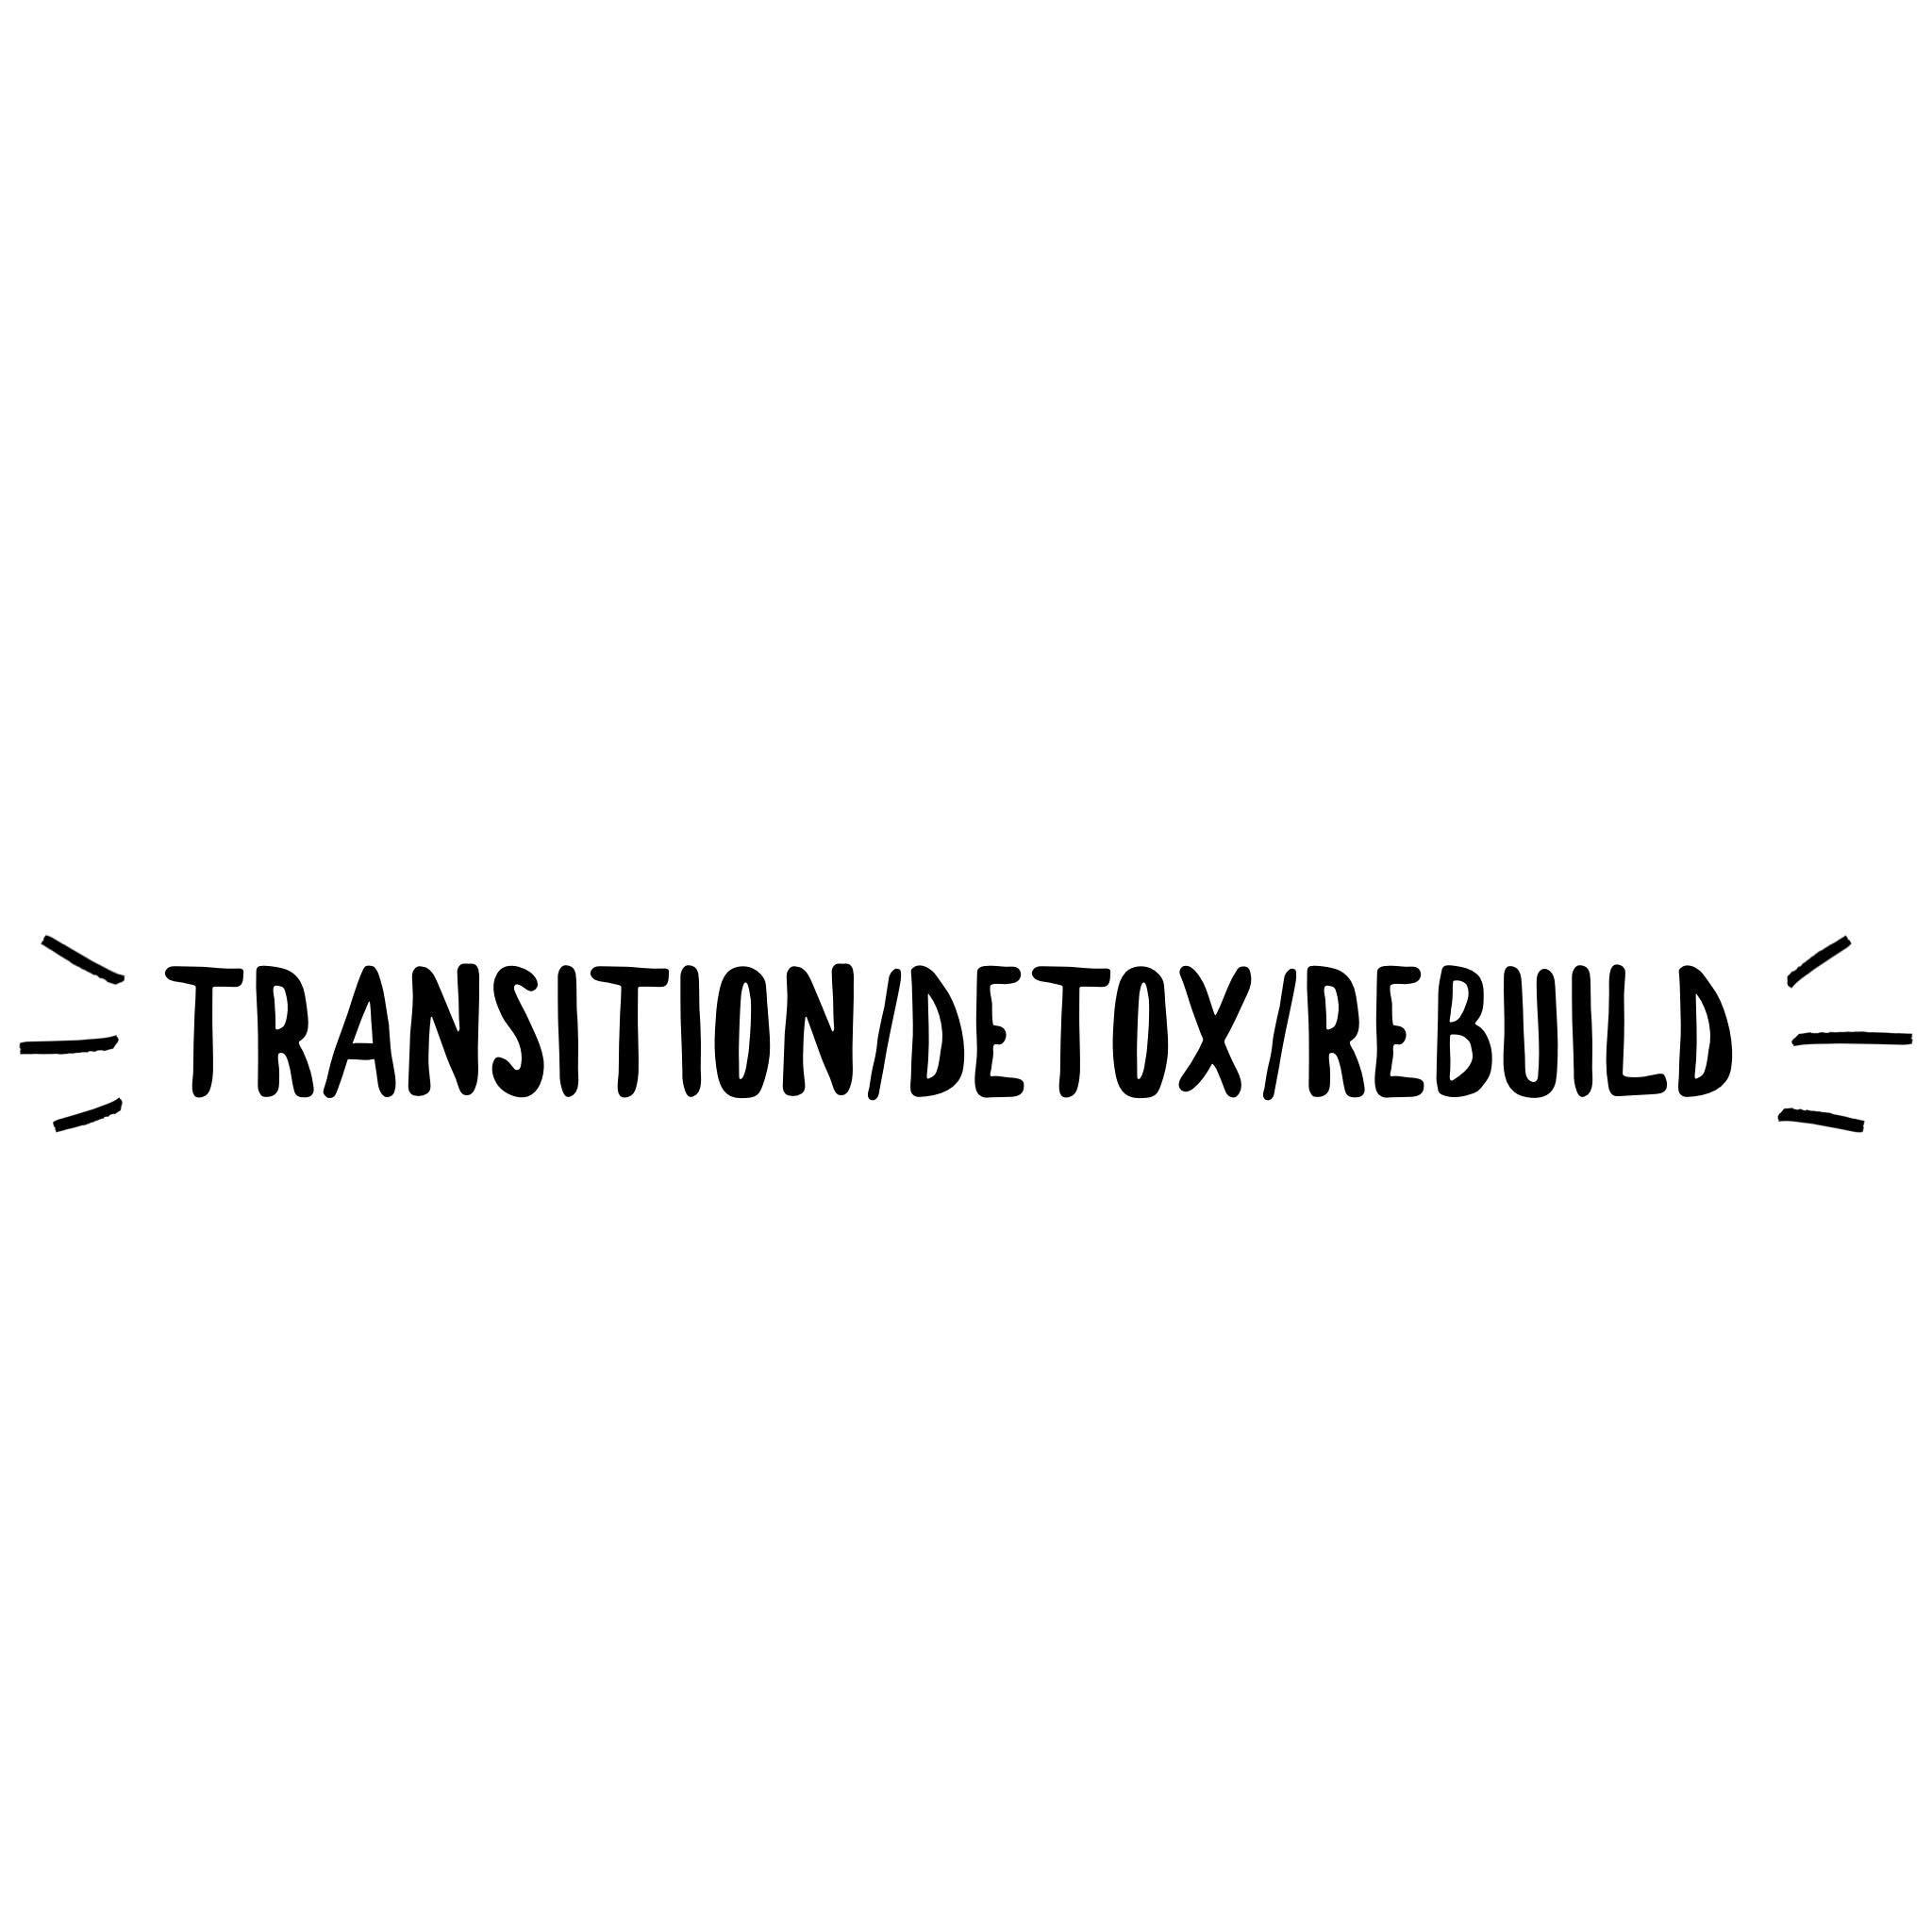 Transition, an all-fruit diet is essential for healing, and how I rebuilt after long term detoxification